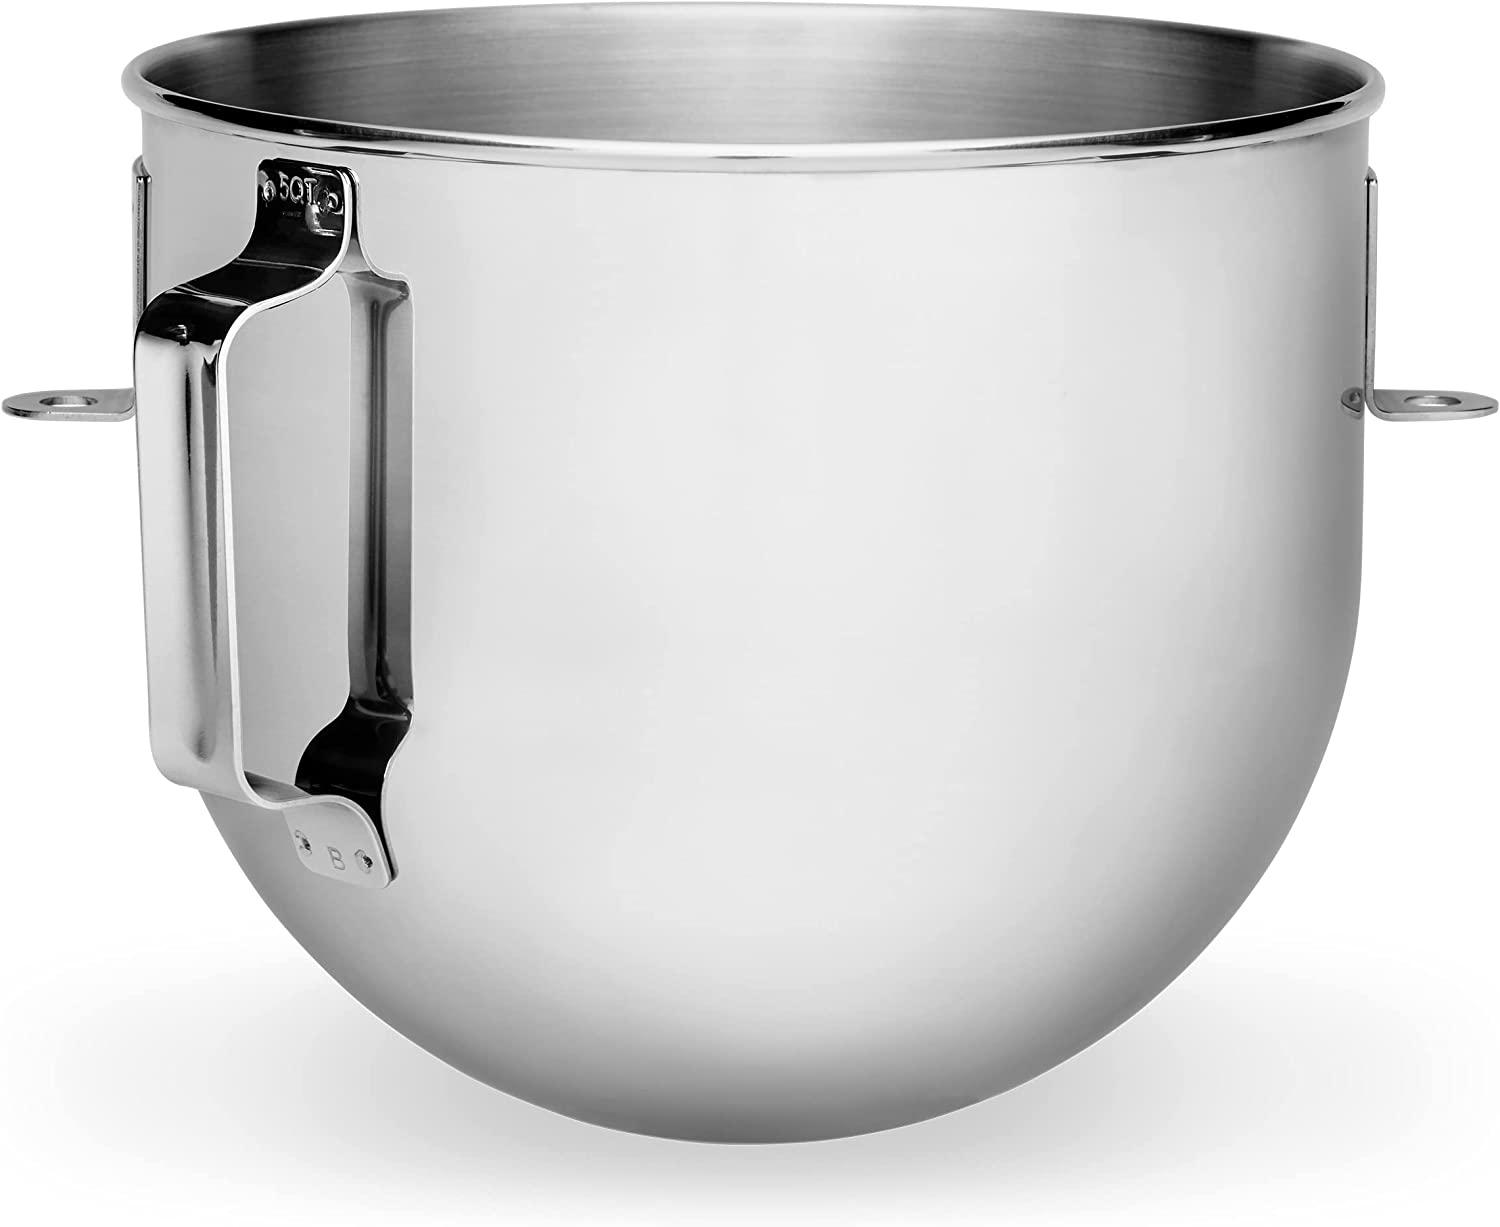 Kitchen Aid 5 Quart Bowl - Tilt Head Stainless Steel Bowl With Handle